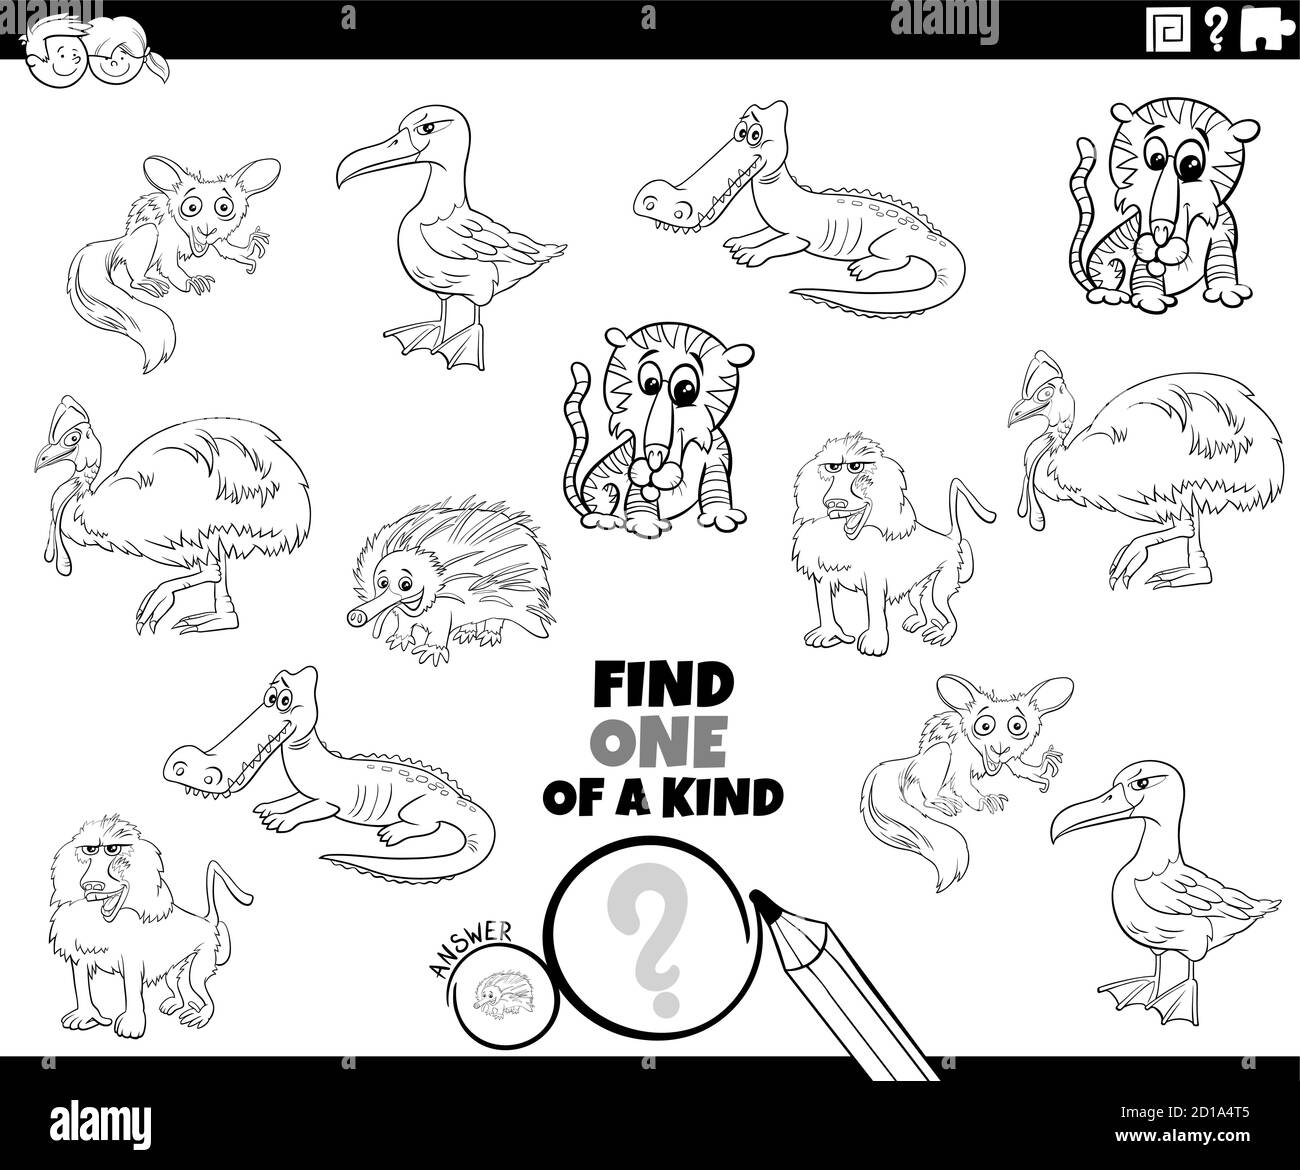 Black and White Cartoon Illustration of Find One of a Kind Picture Educational Game with Comic Wild Animal Characters Coloring Book Page Stock Vector